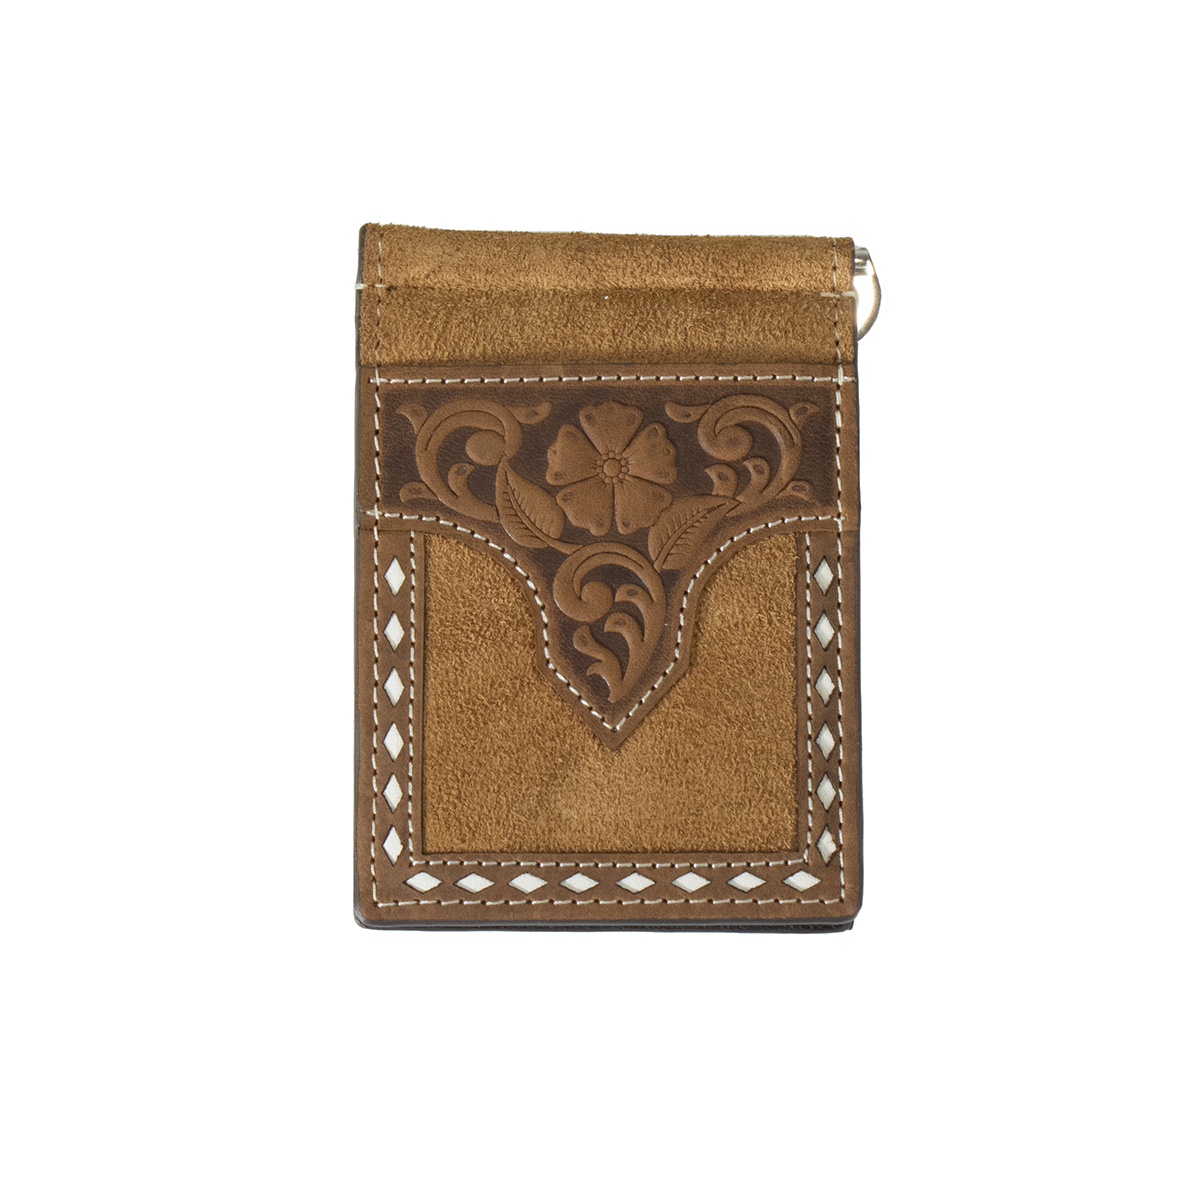 Nocona Money Clip Roughout Floral Tab White Bucklace Wallet